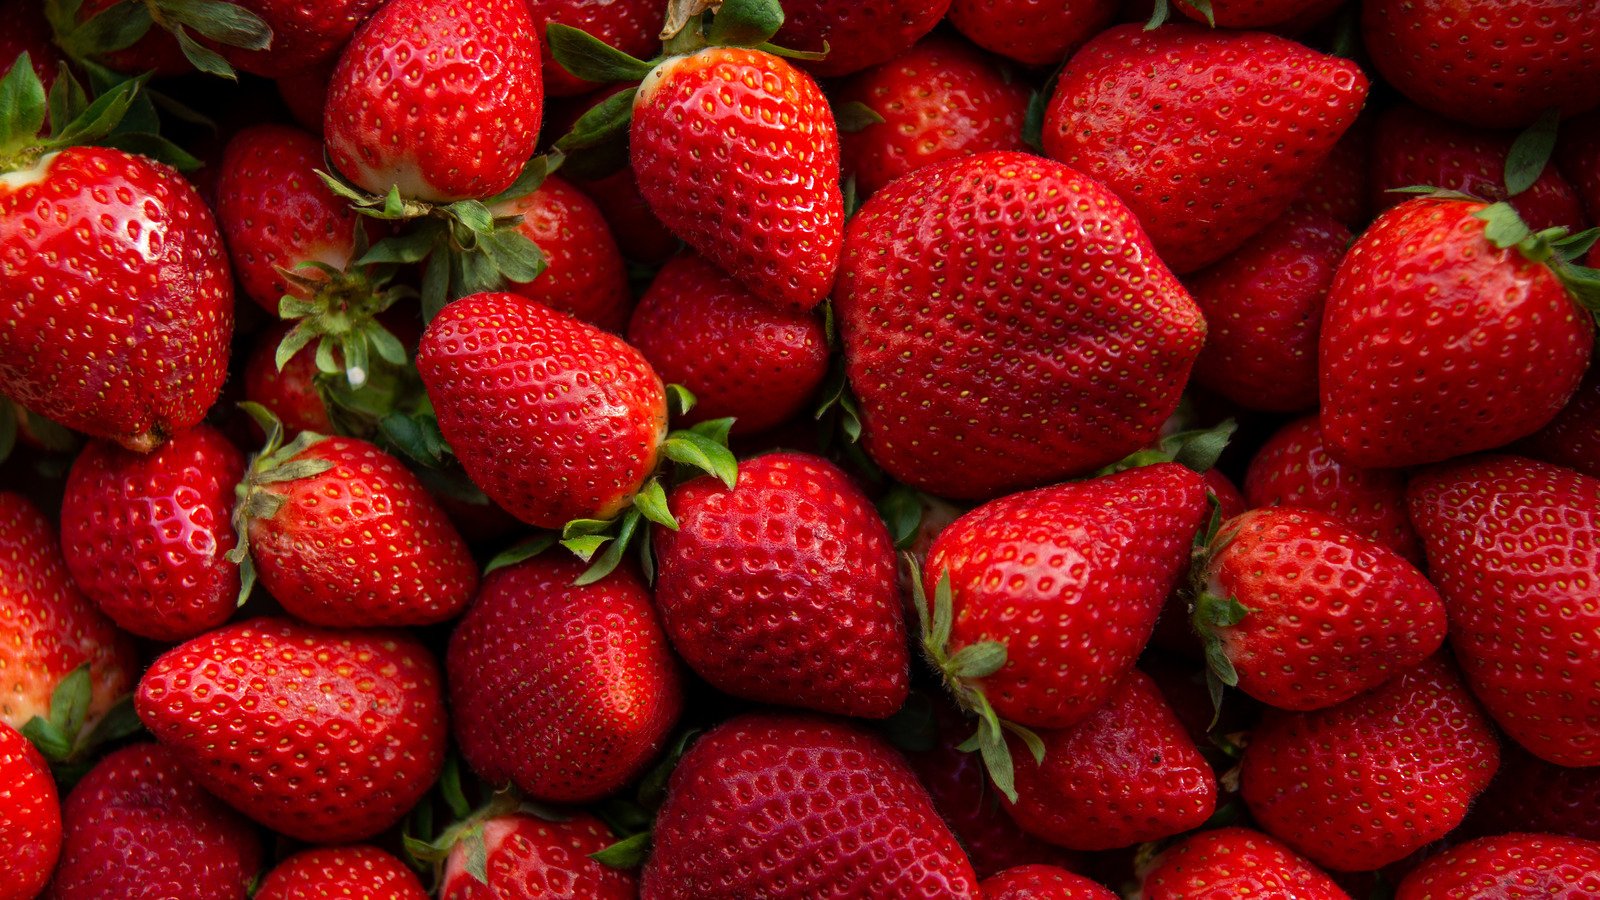 Here's How To Choose The Best Strawberries